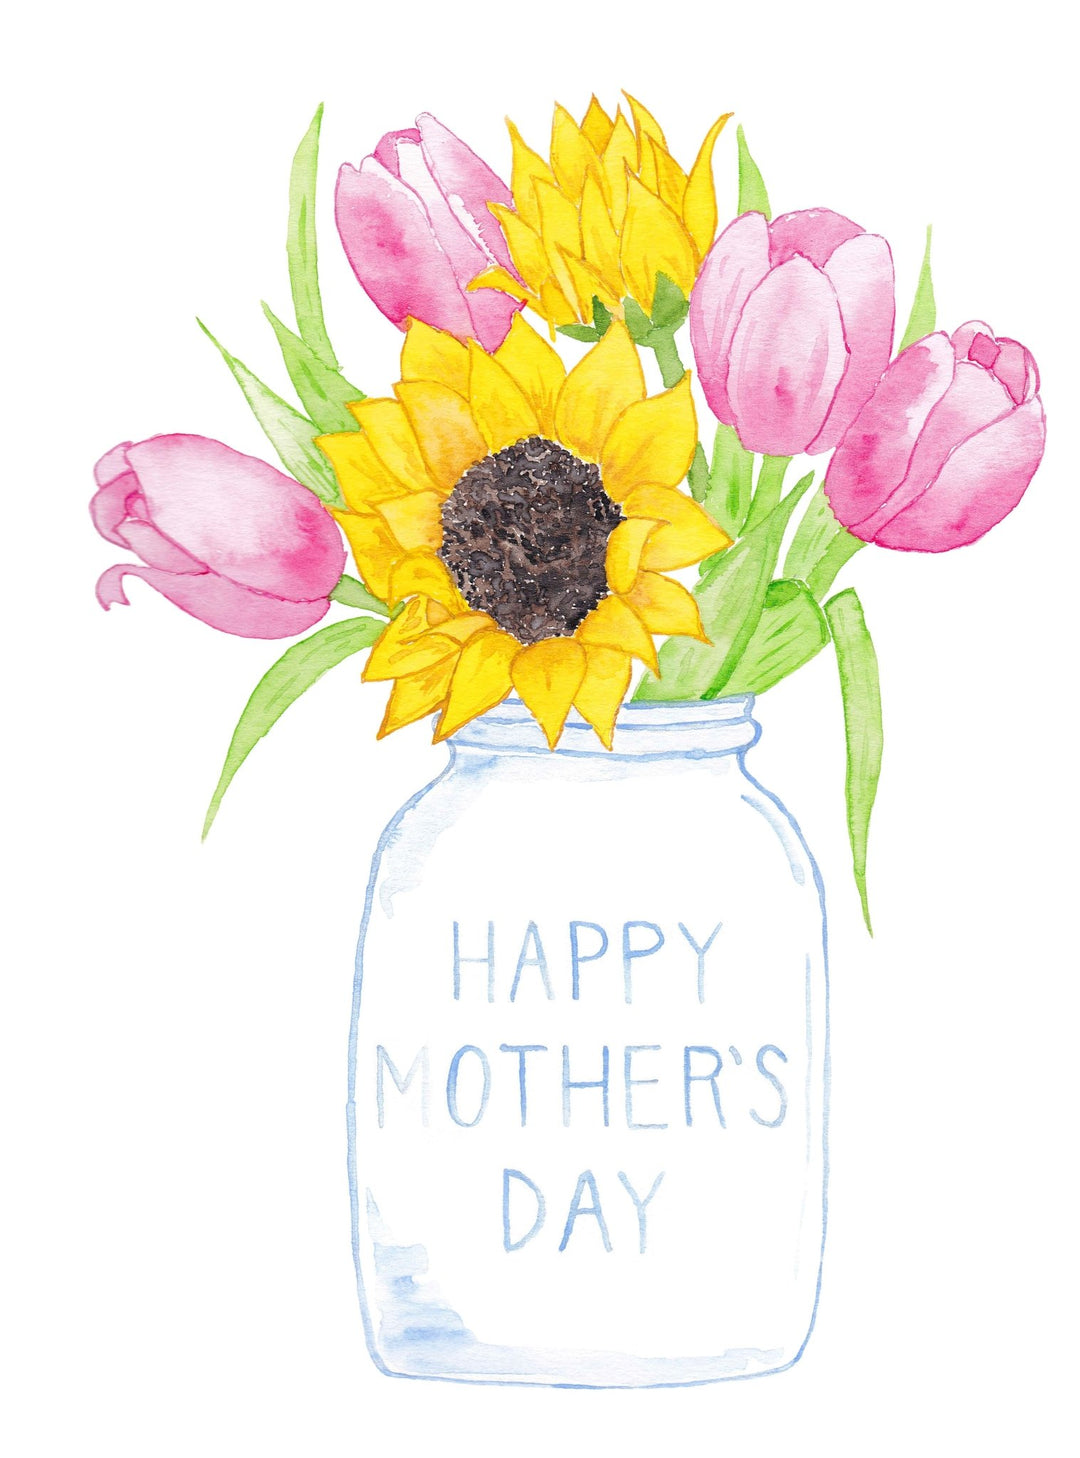 Mother's Day Greeting Cards - #Perch#